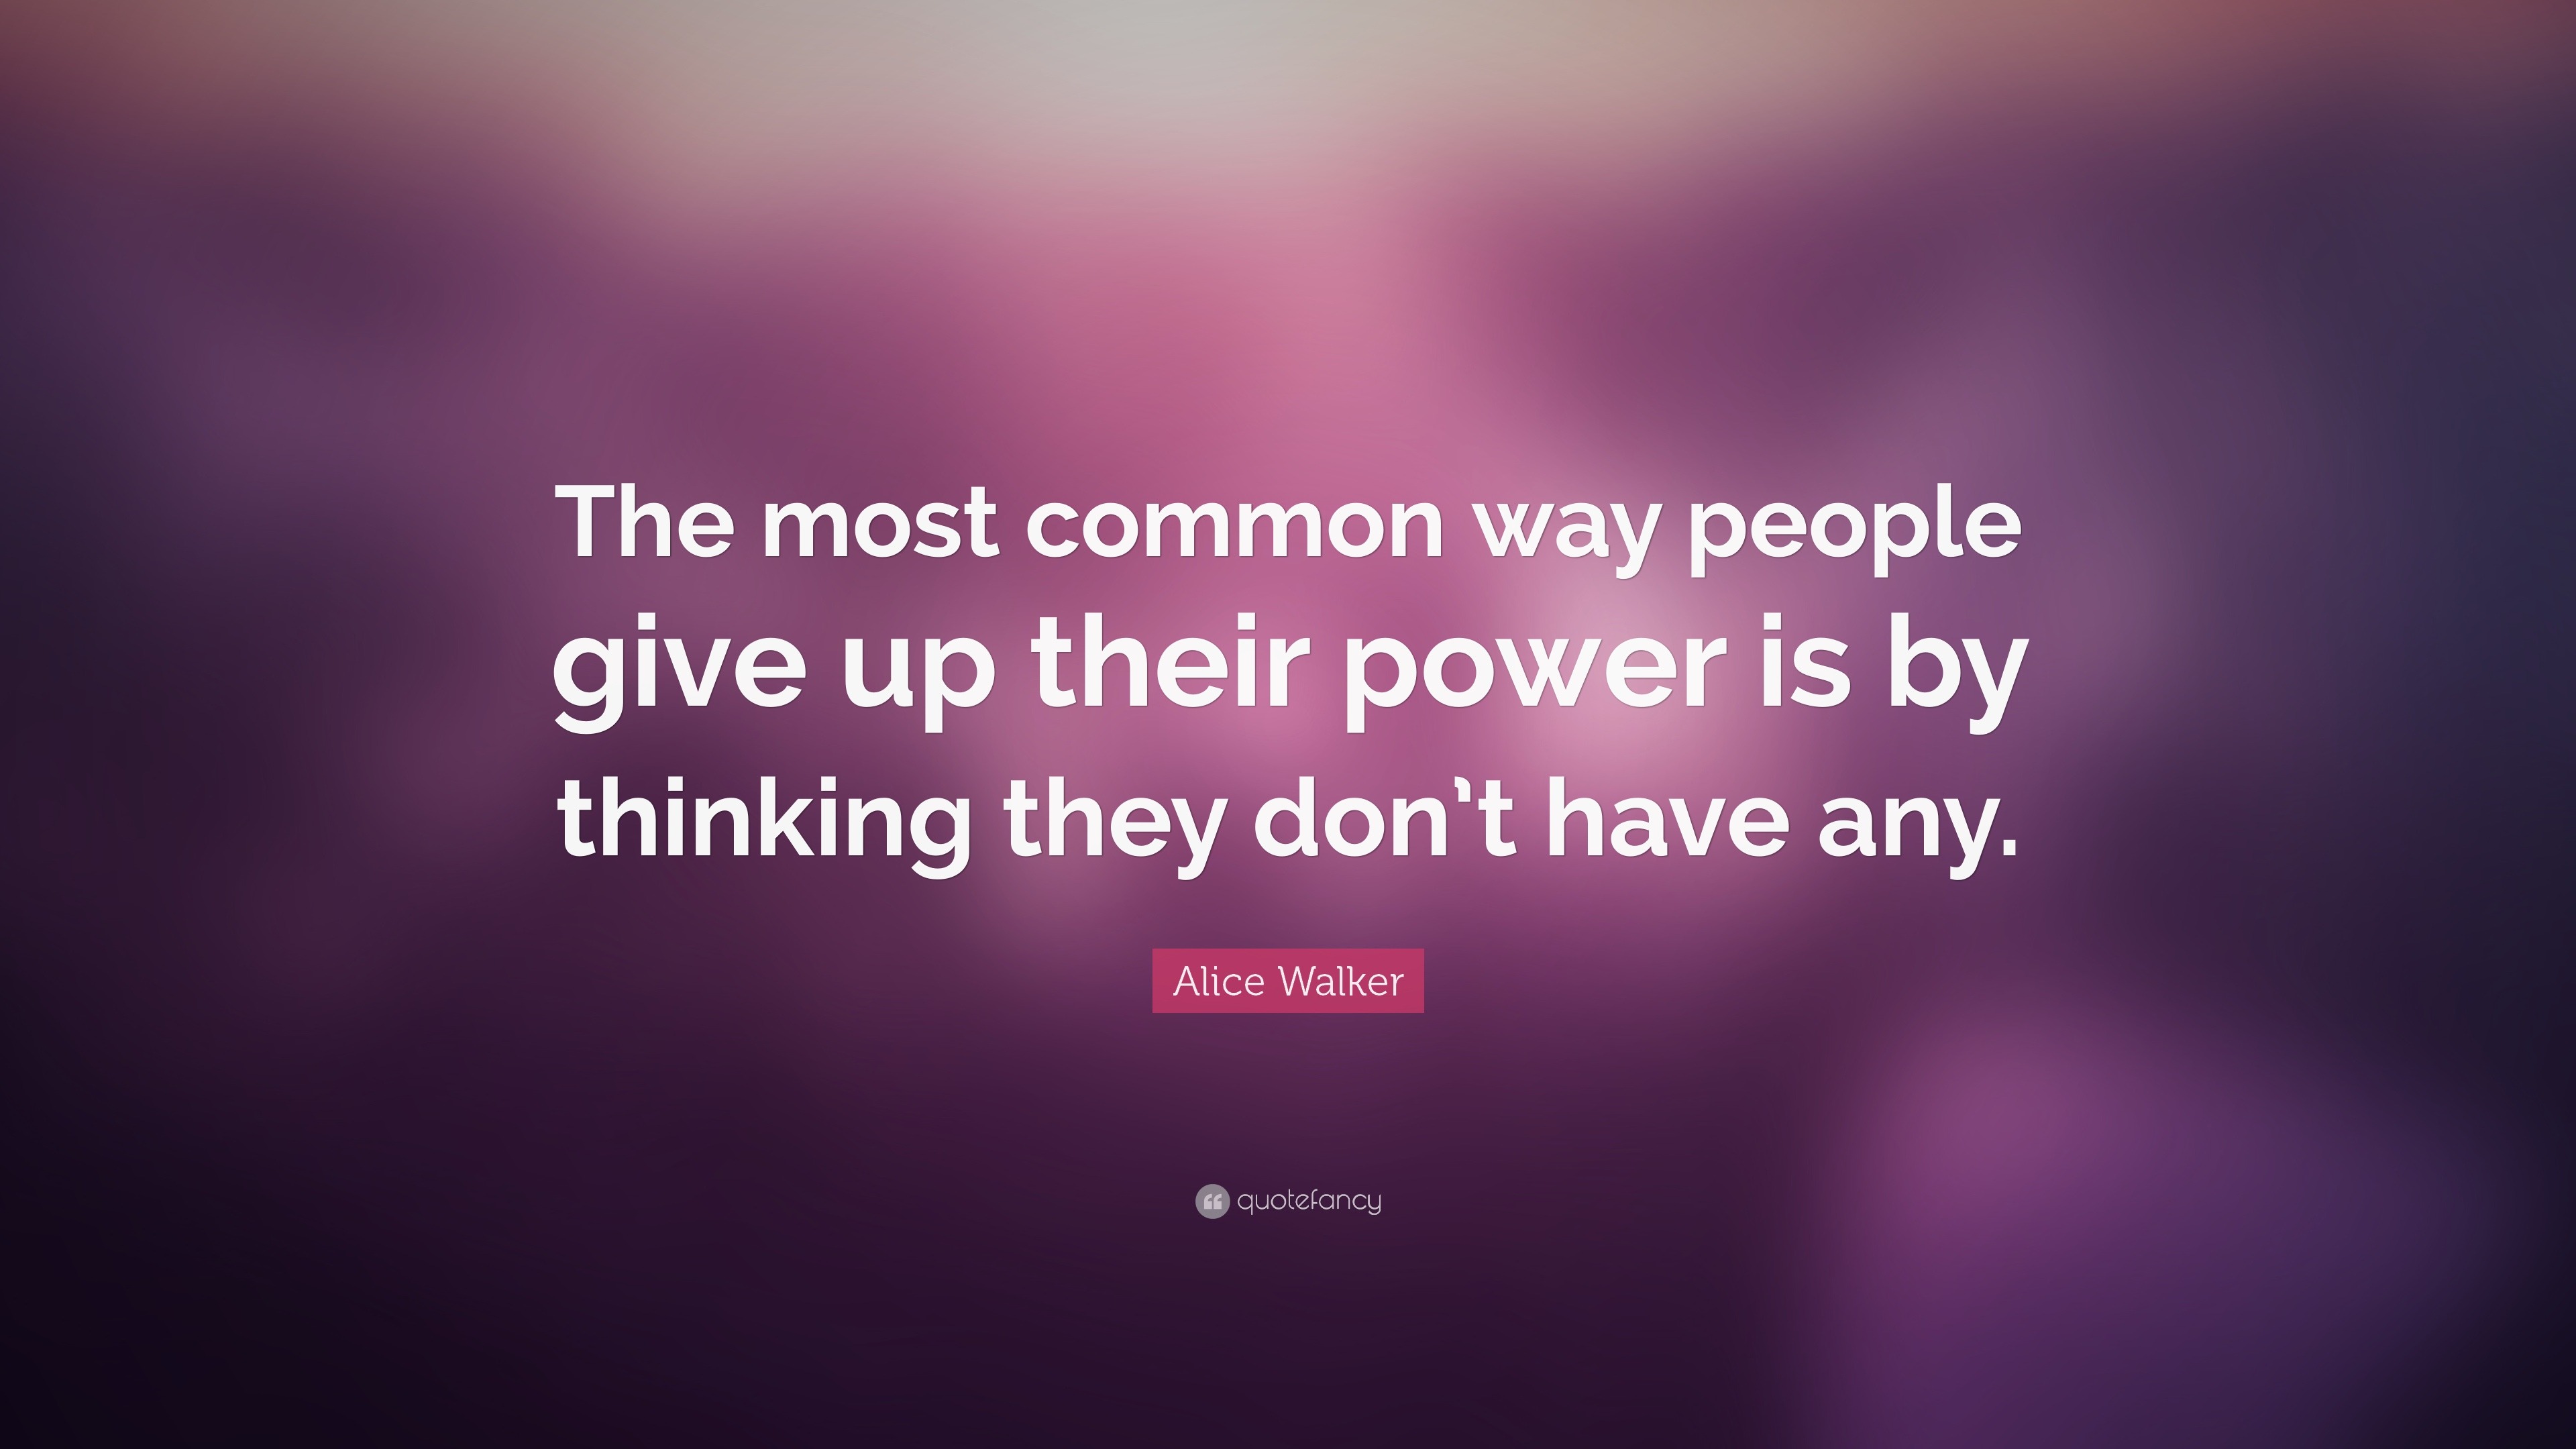 Alice Walker Quote: “The most common way people give up their power is